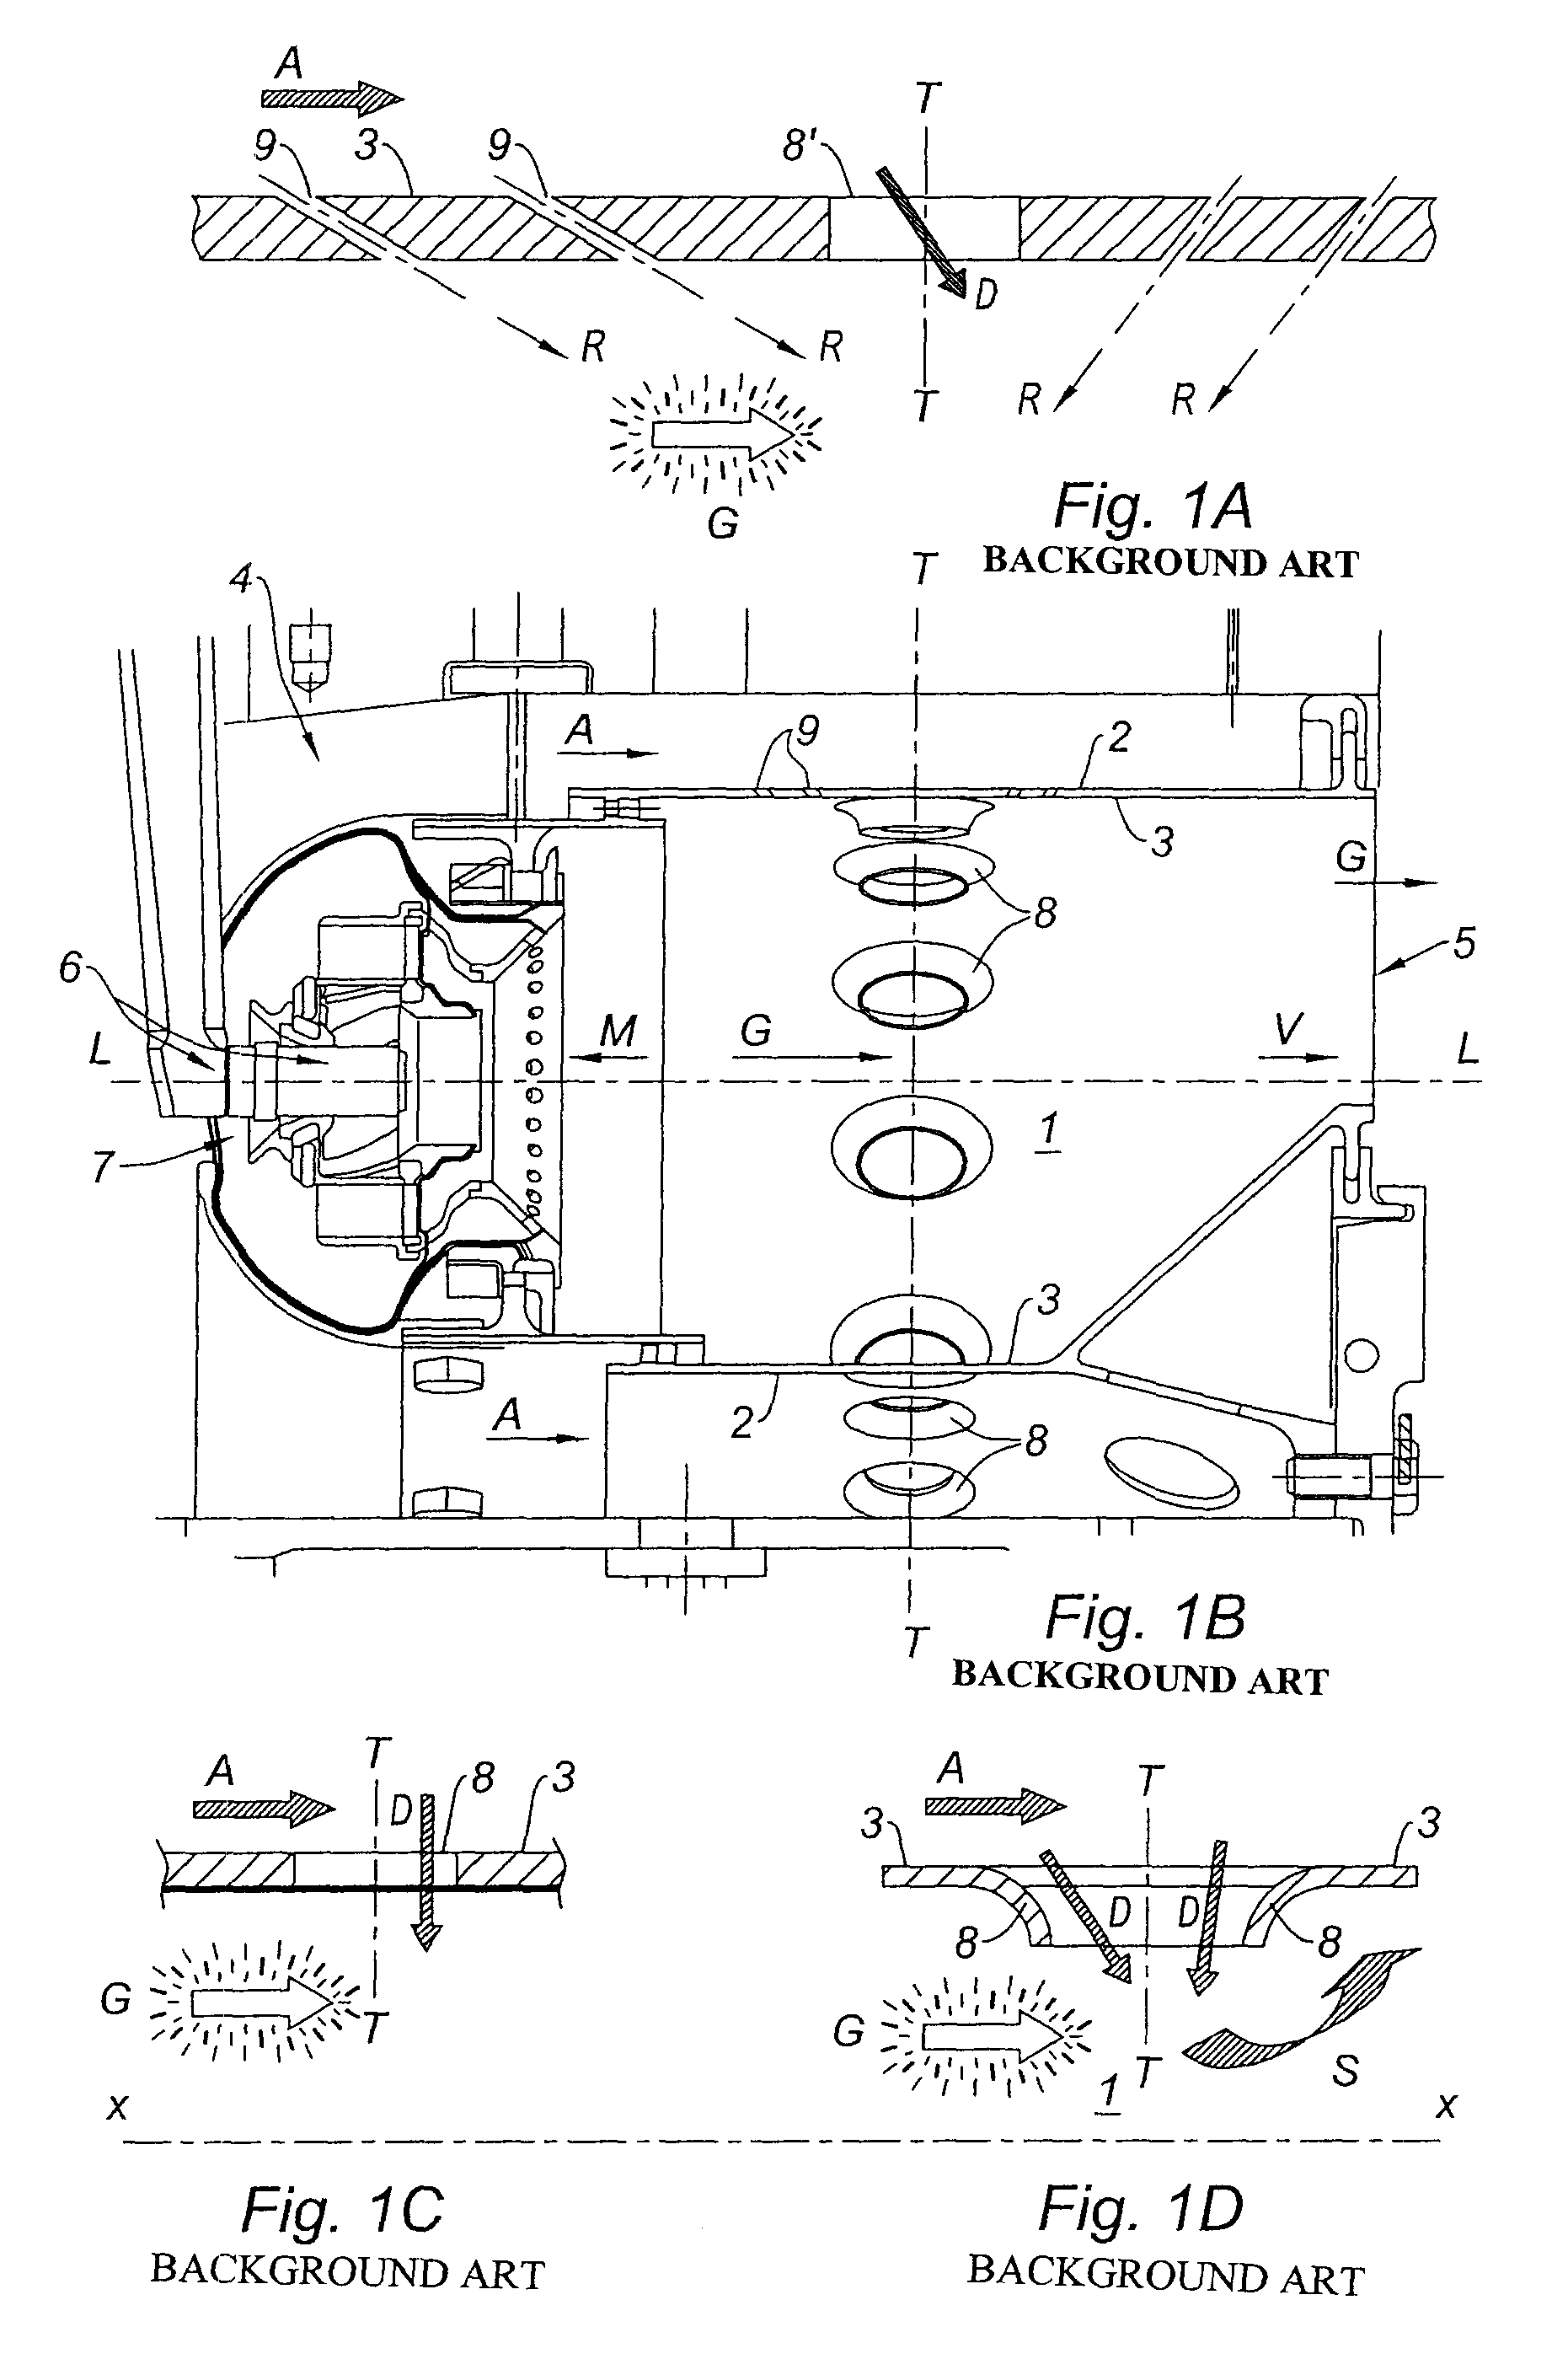 Configuration of dilution openings in a turbomachine combustion chamber wall